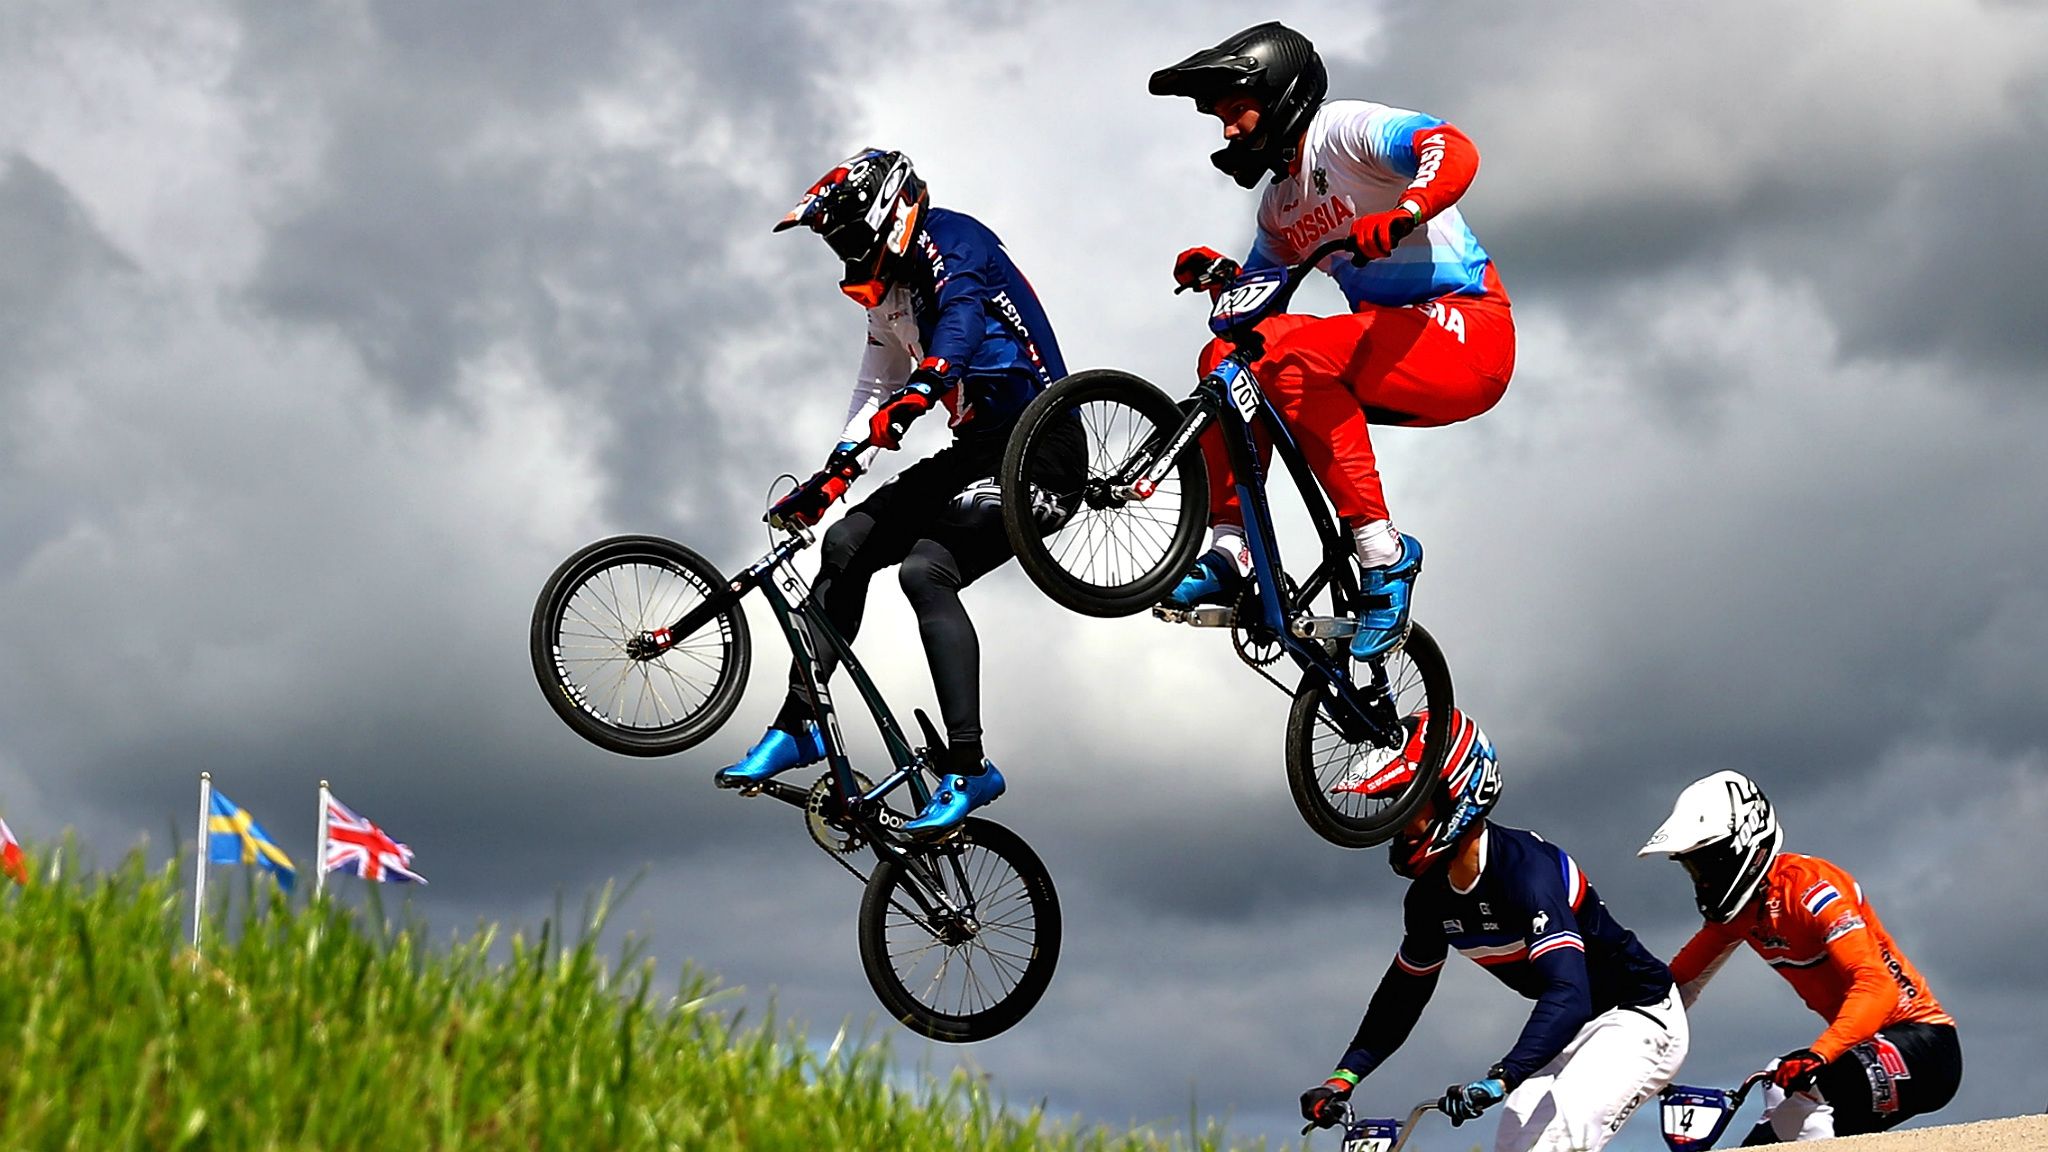 England BMX rider Kyle Evans competes at the European Championships in Glasgow